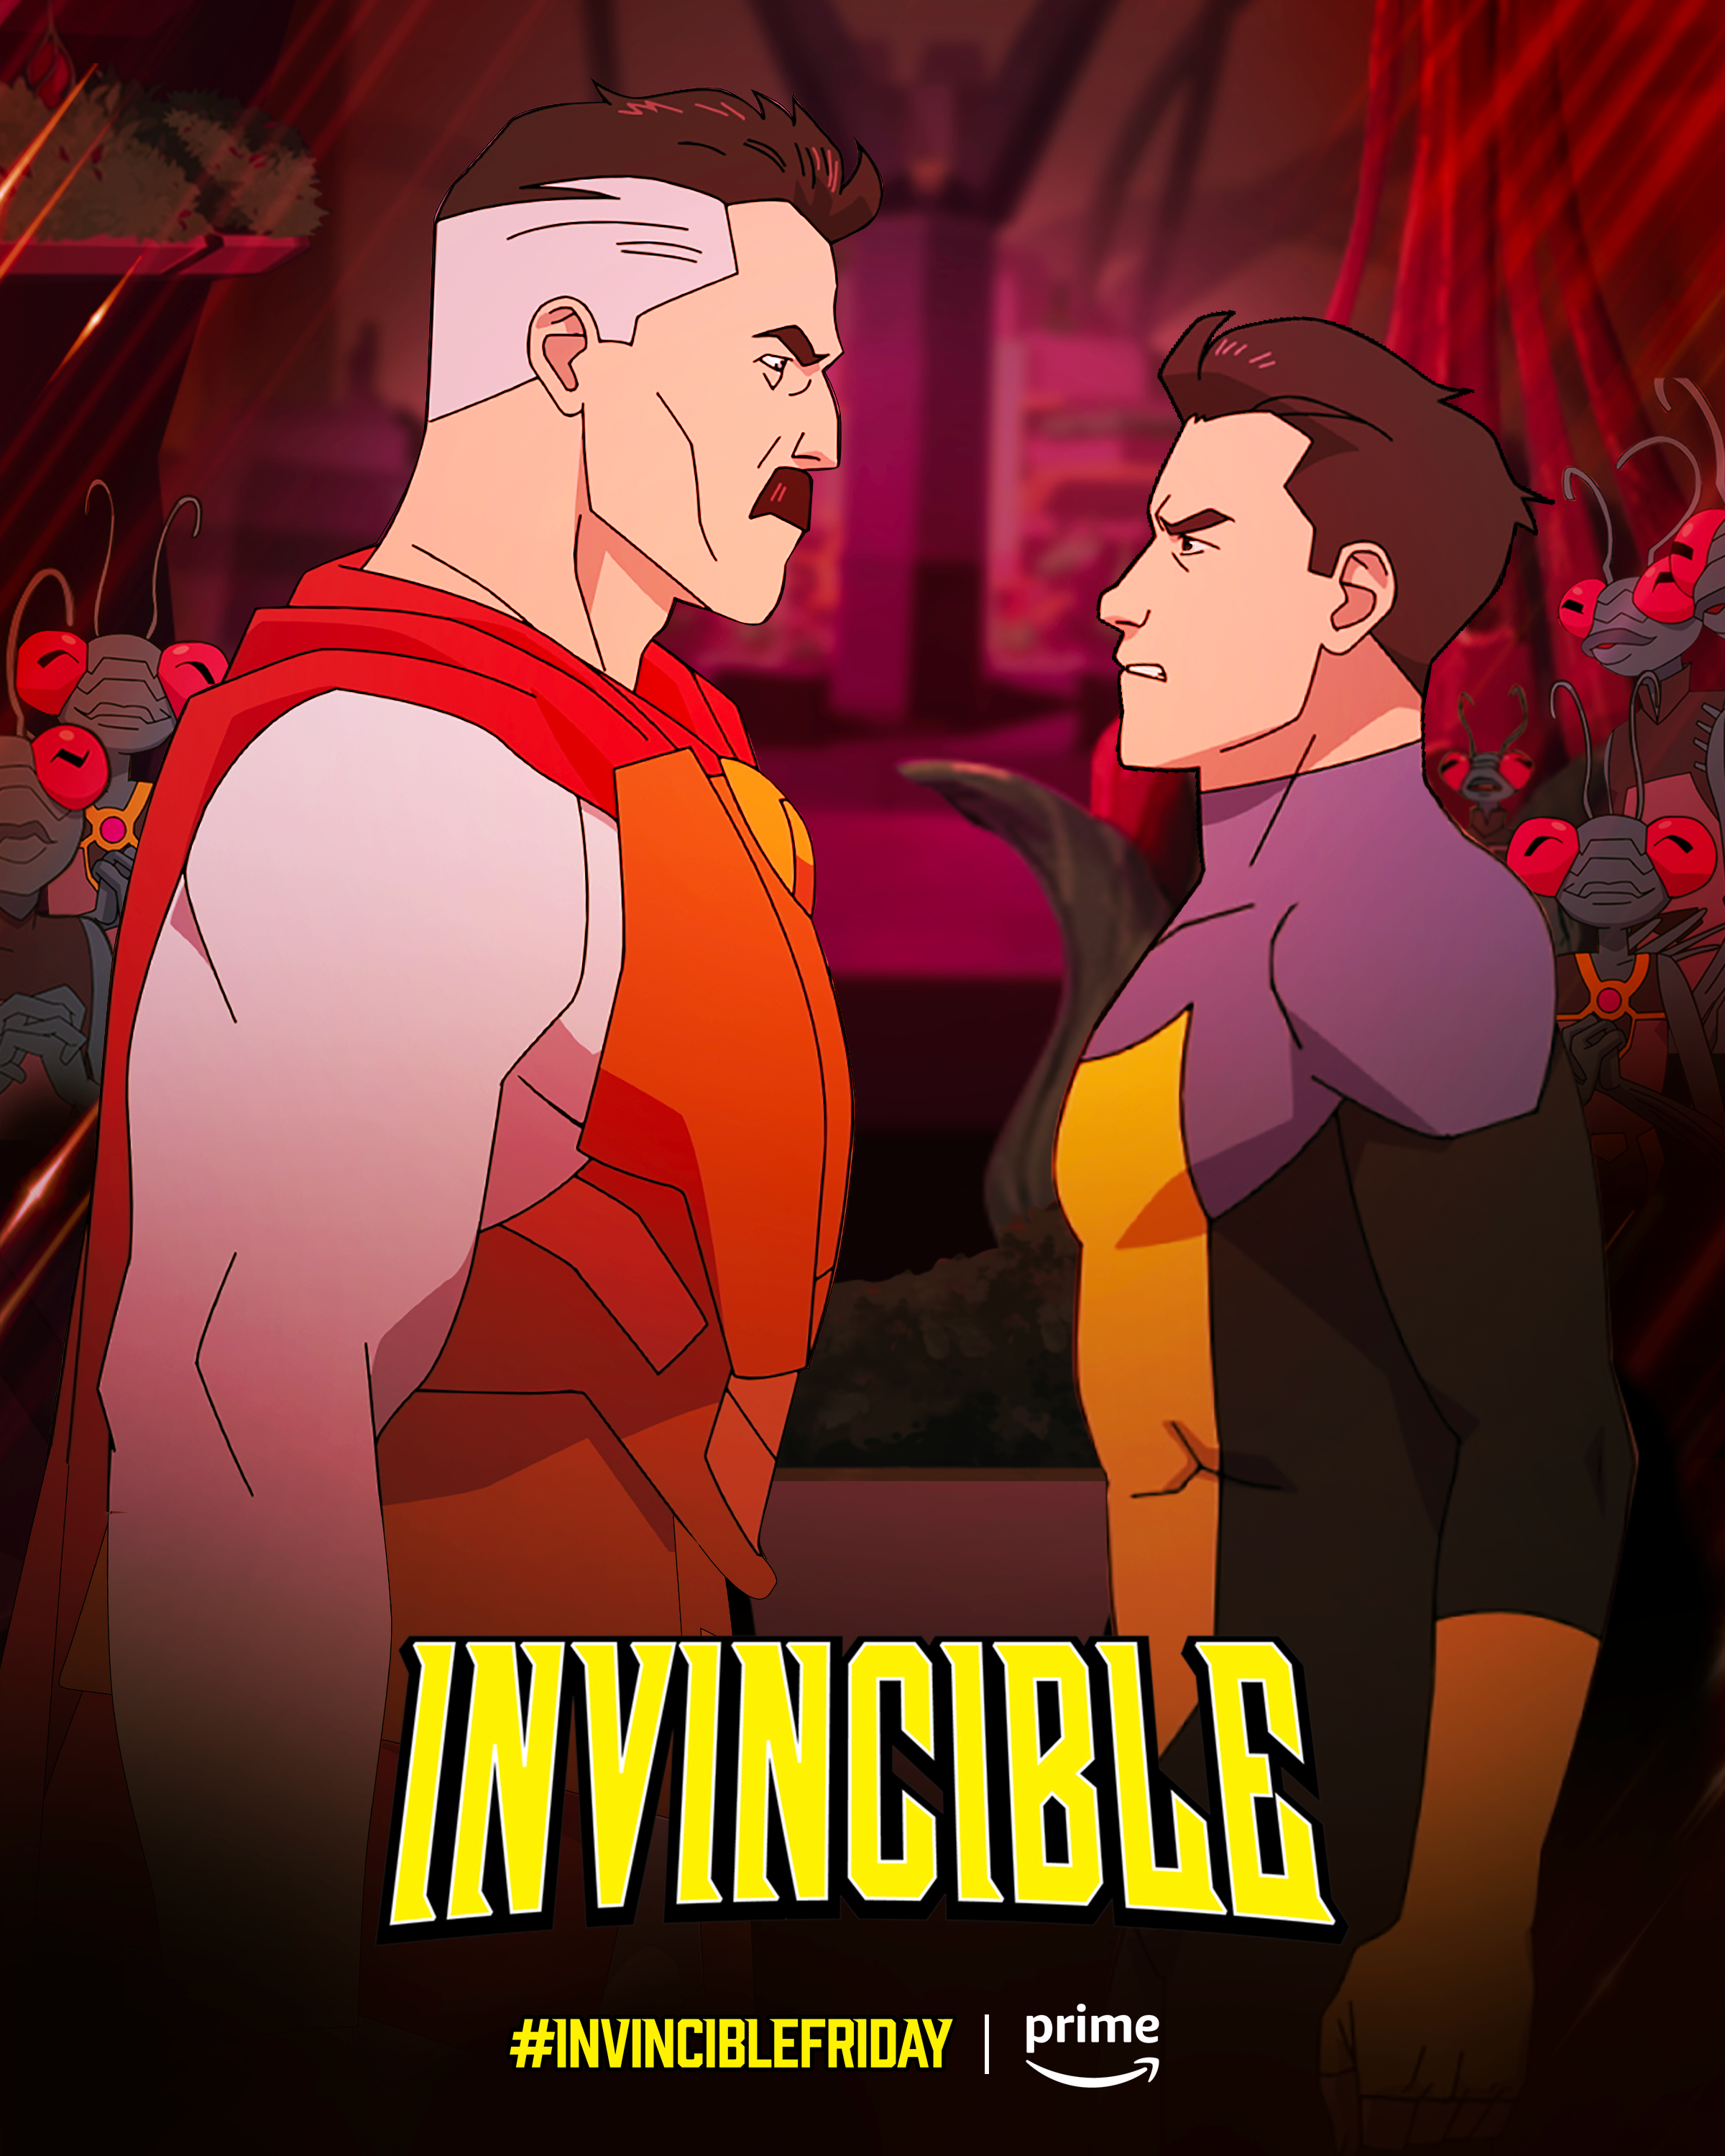 Invincible: Season 2 (Poster) by thespiderfan on DeviantArt